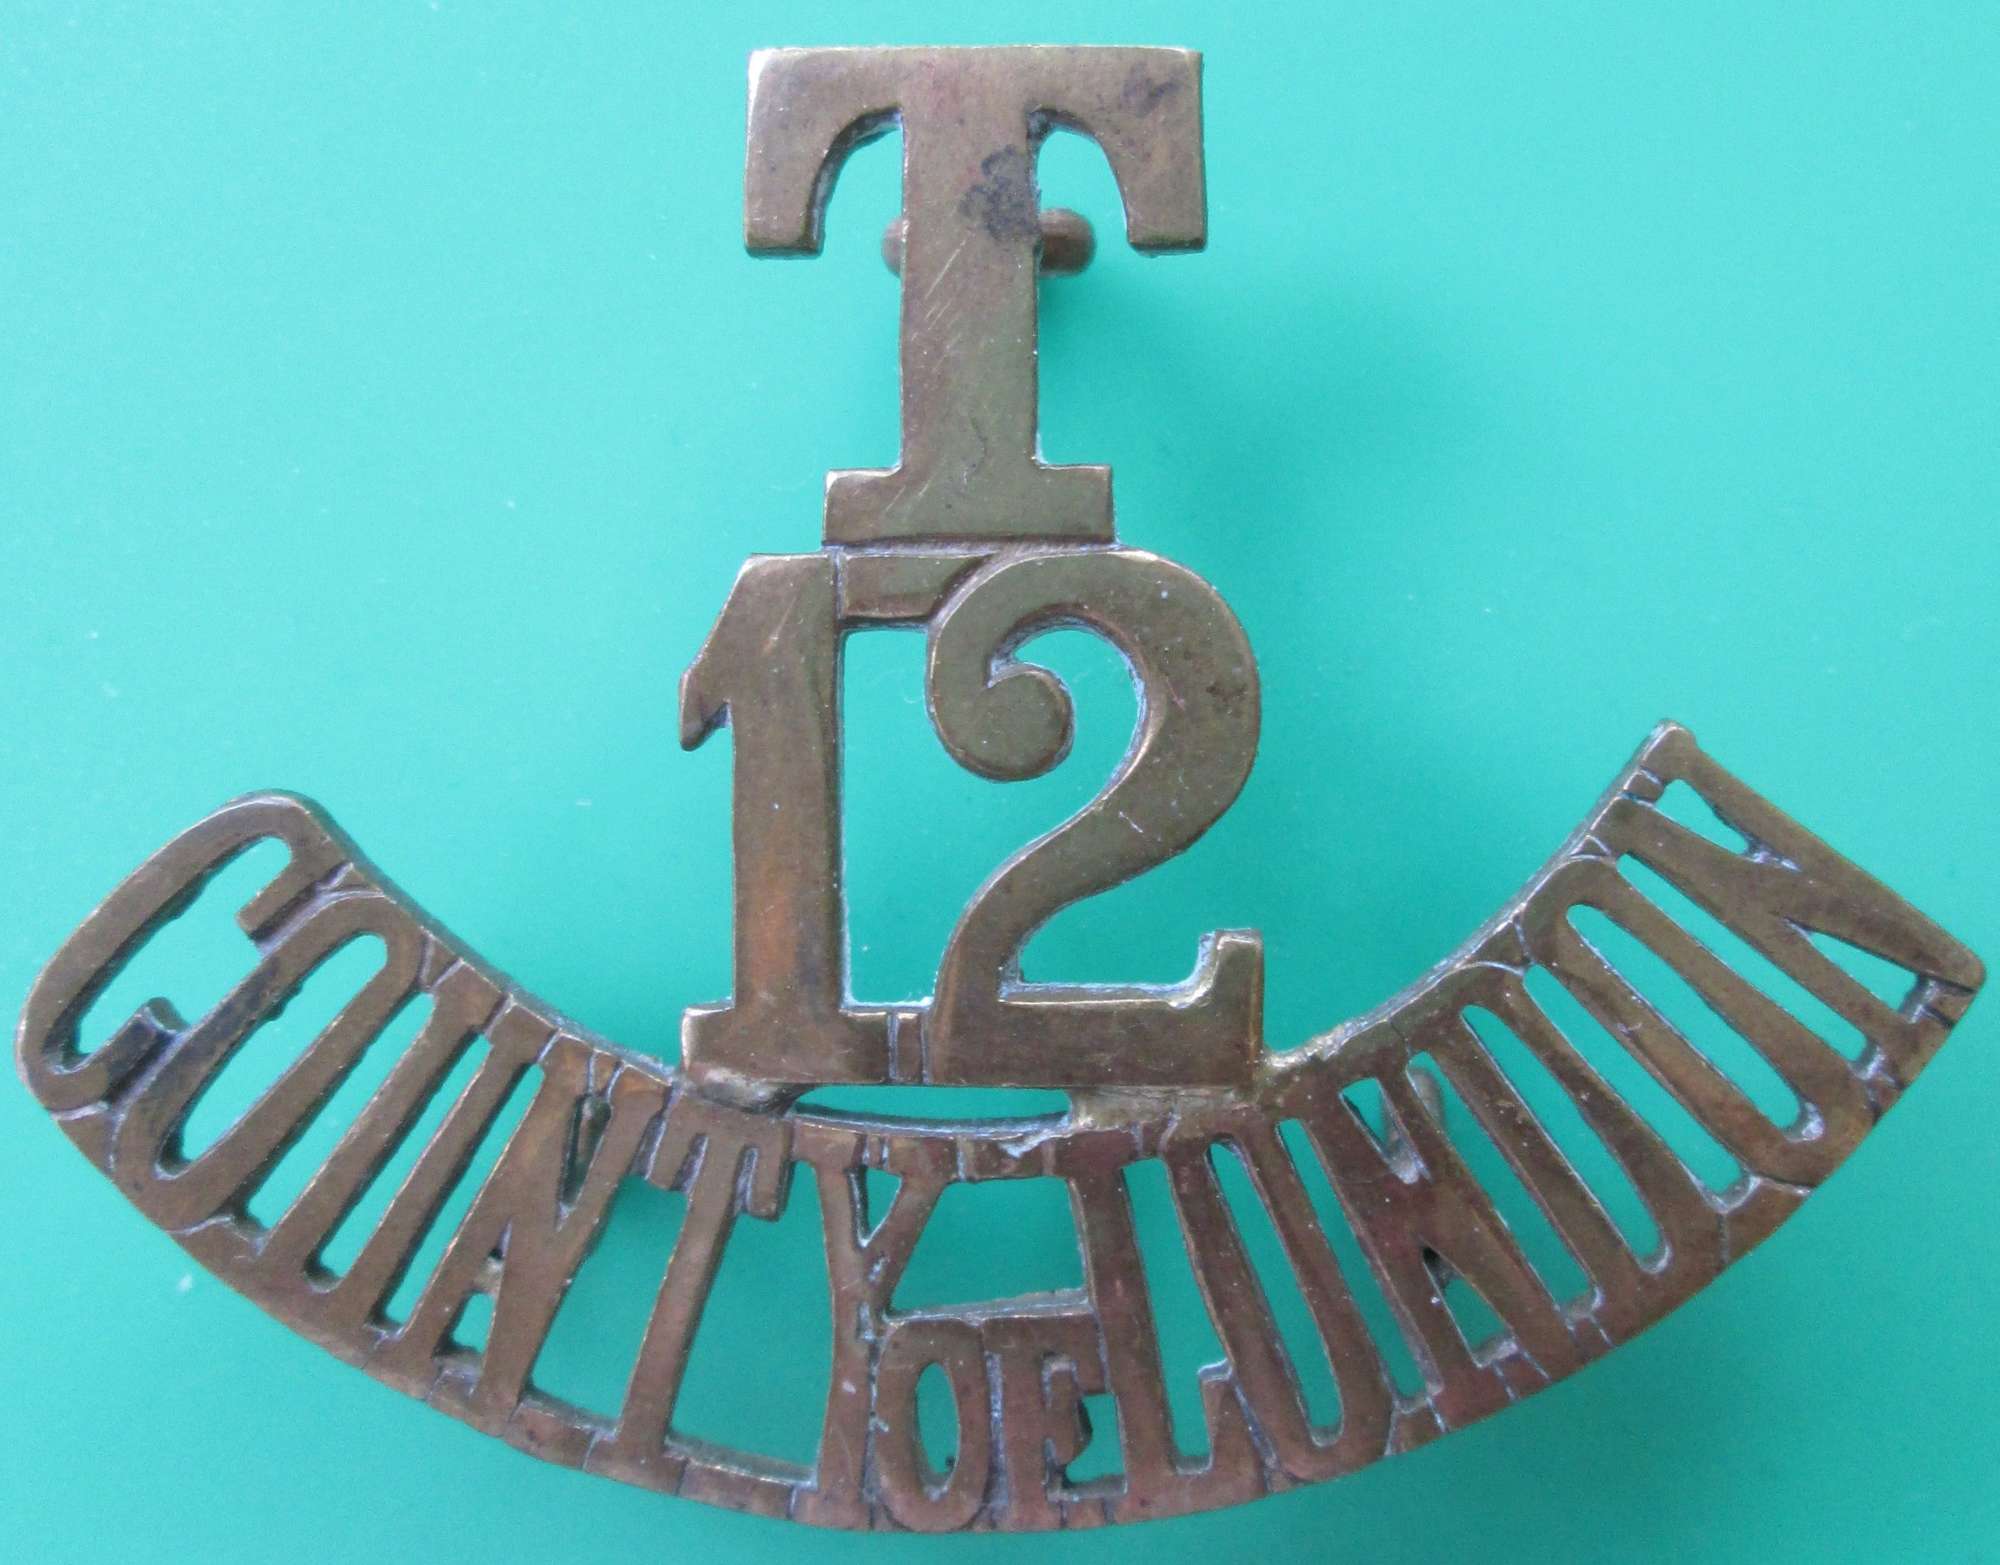 A 12TH TERRITORIAL COUNTY OF LONDON REGT ( RANGERS ) SHOULDER TITLE